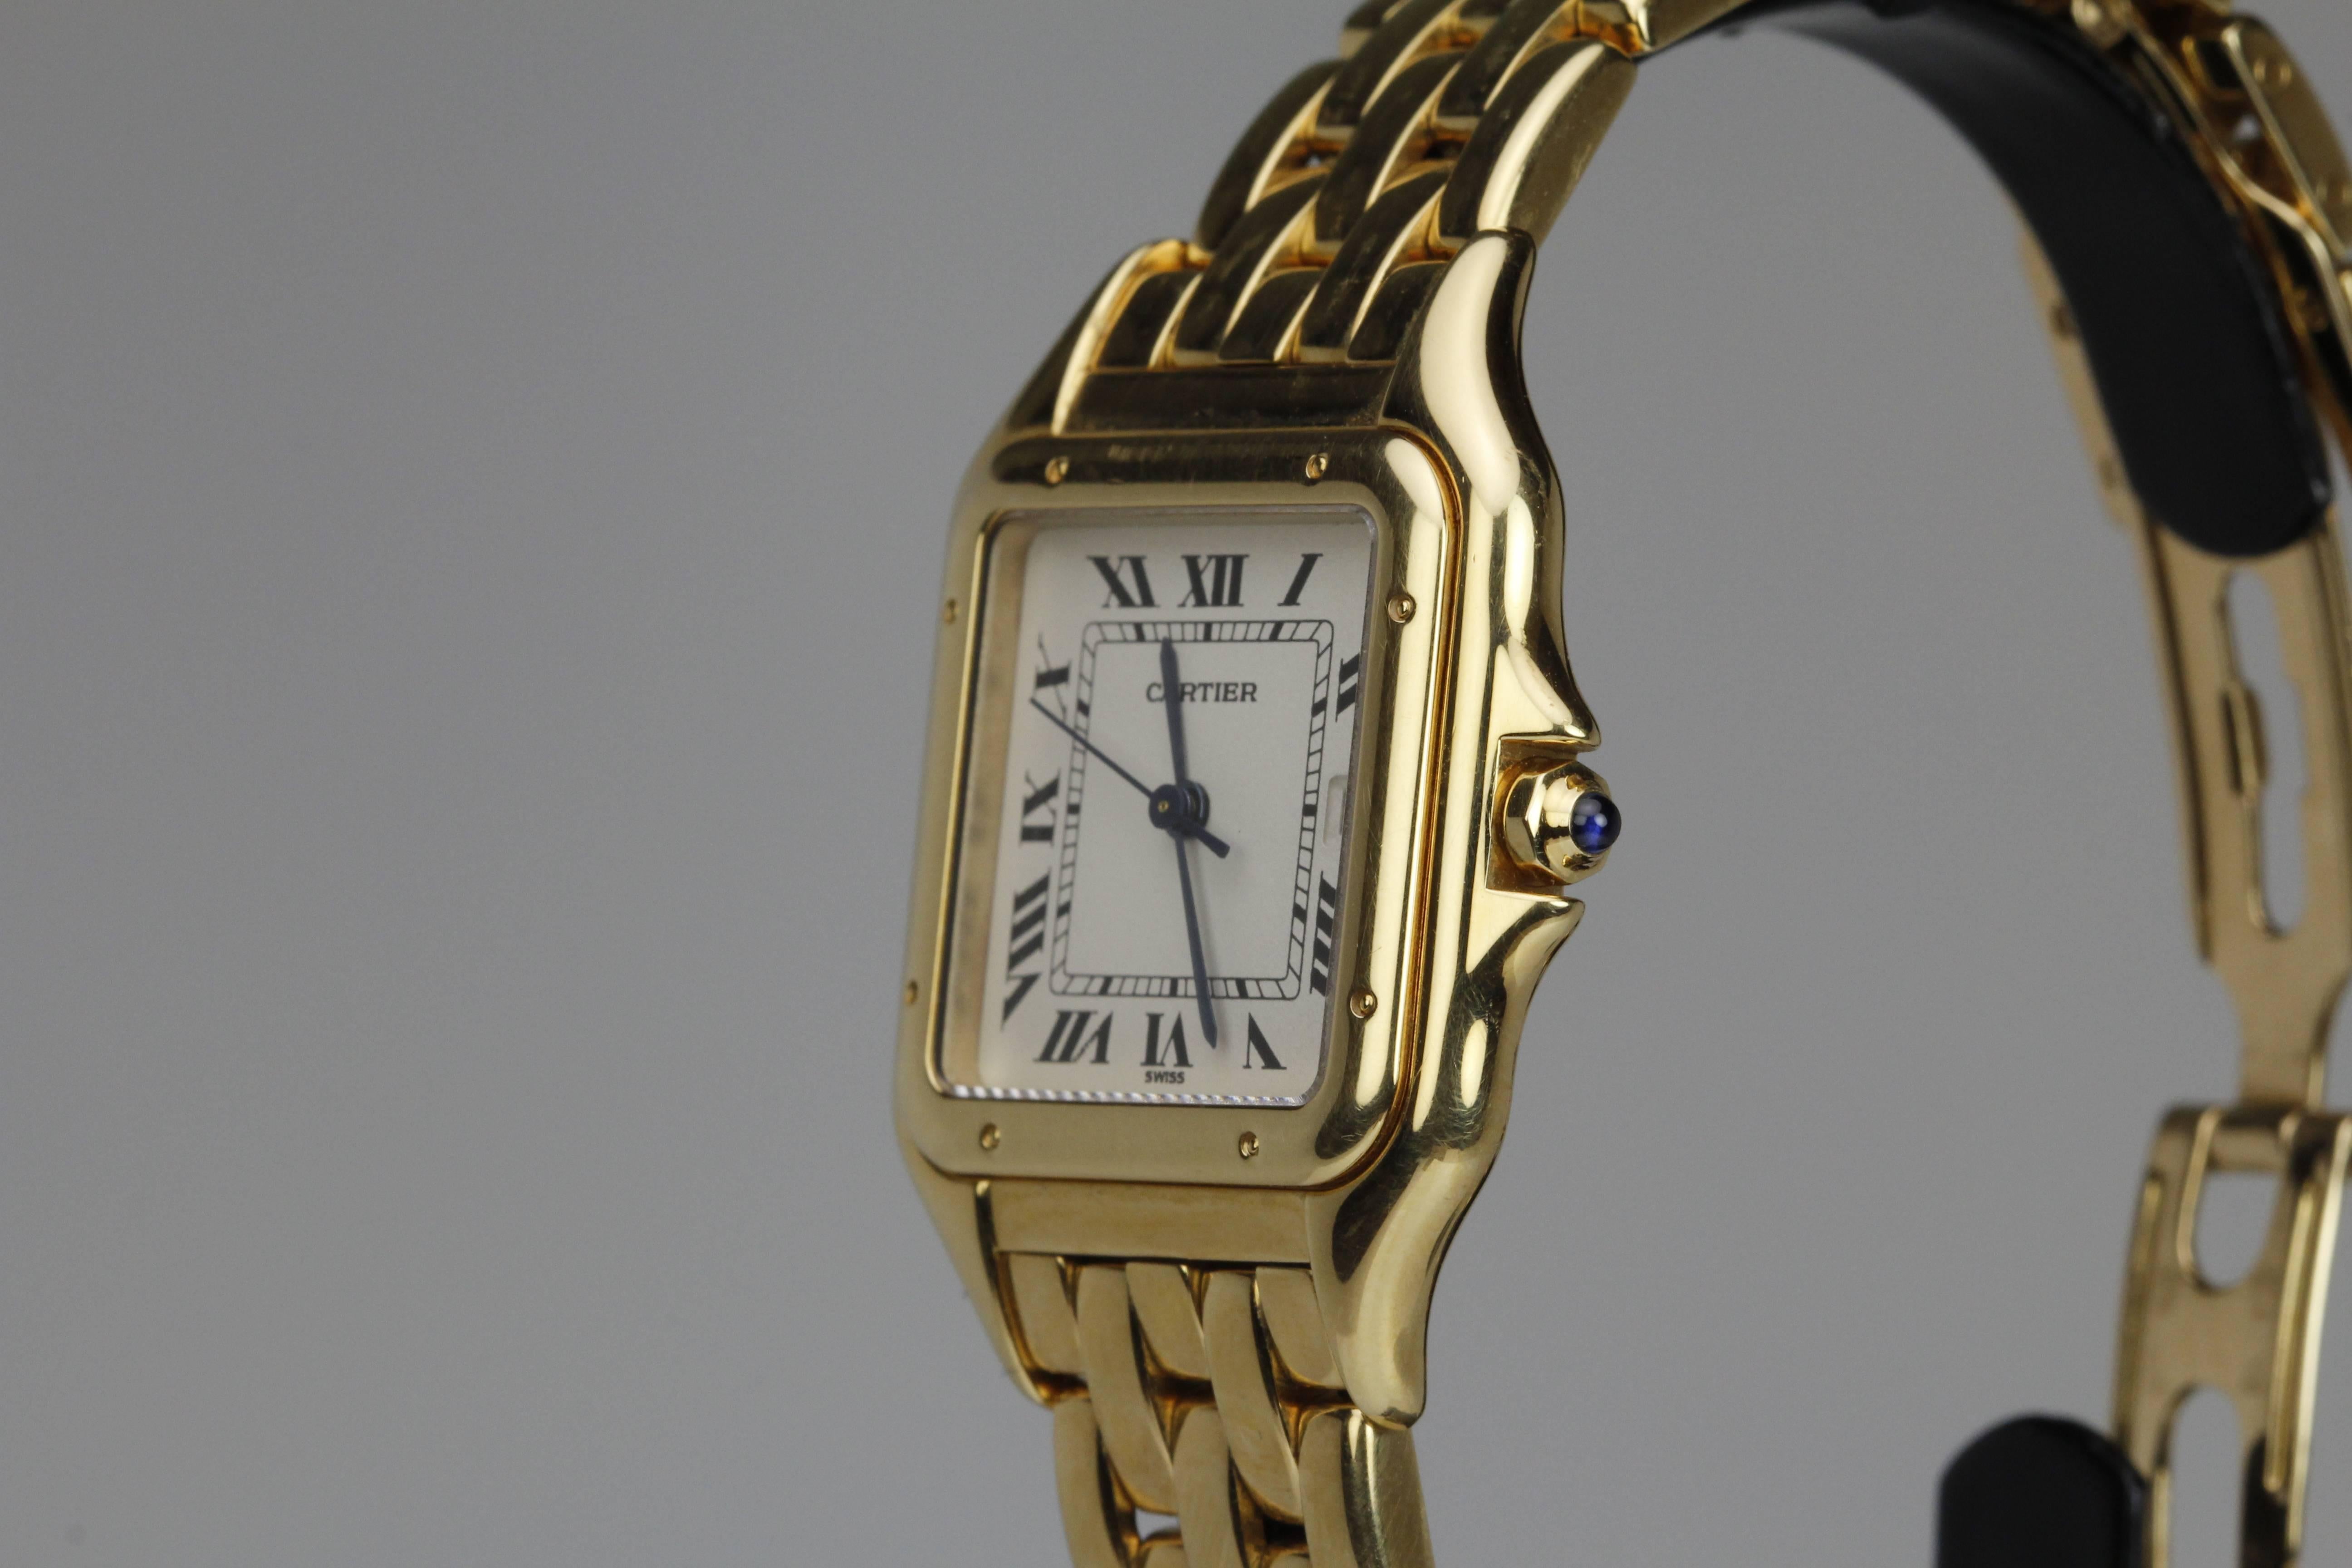 Cartier Yellow Gold Panthere with a quartz movement. This is a medium size case and the bracelet has extra links. Width of the case measures 27mm without the crown guard and length measures from tip of lugs.
